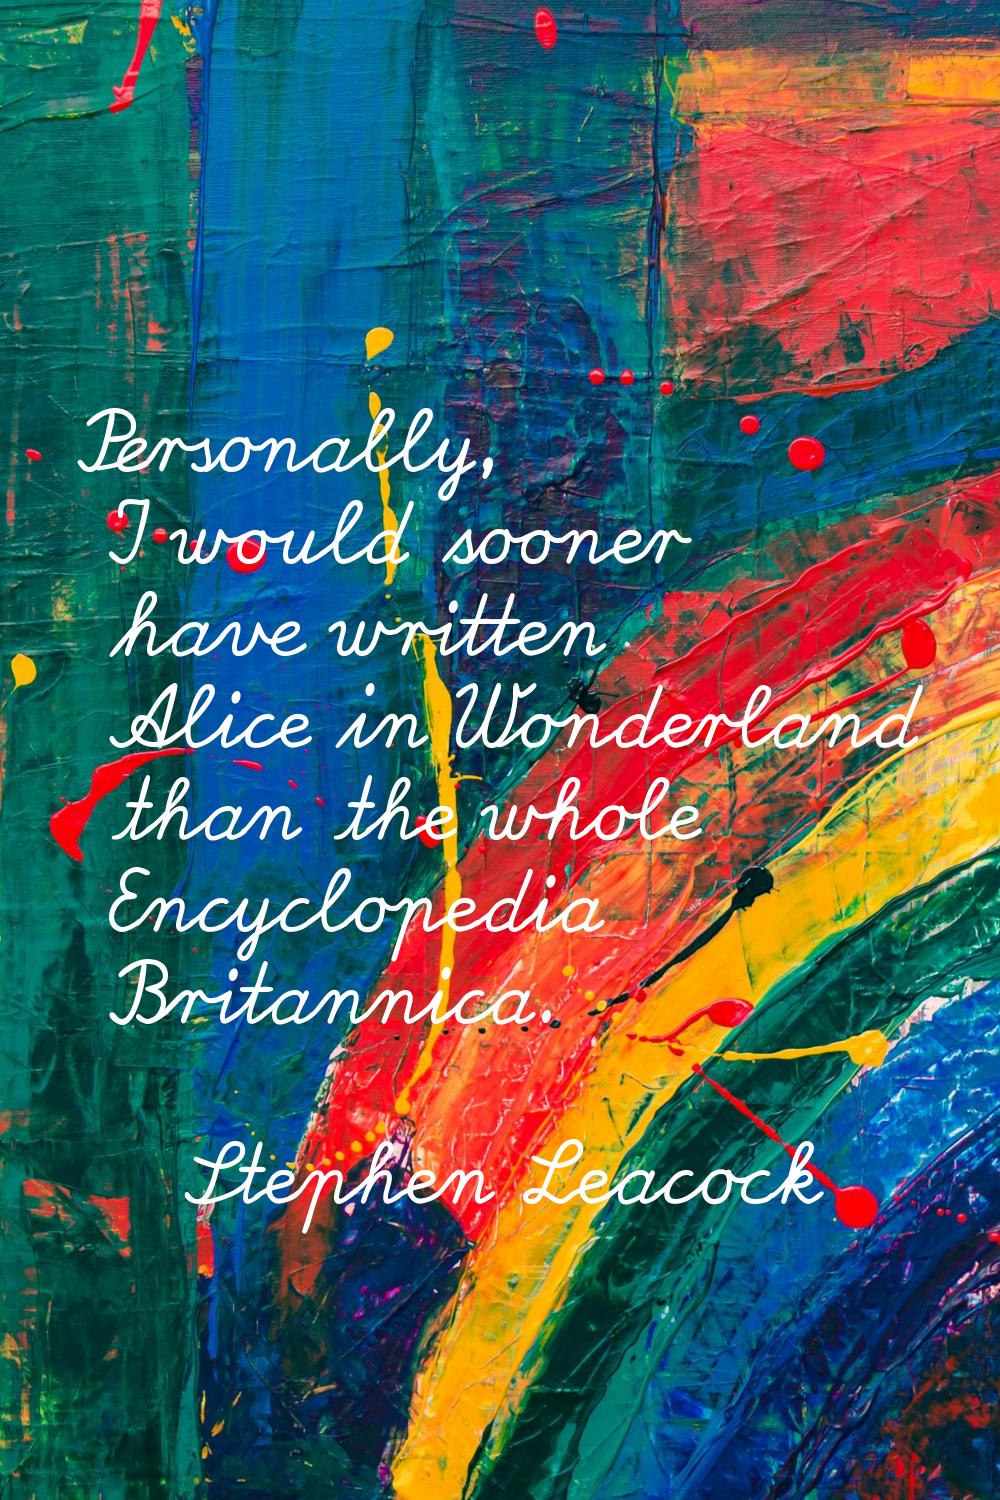 Personally, I would sooner have written Alice in Wonderland than the whole Encyclopedia Britannica.